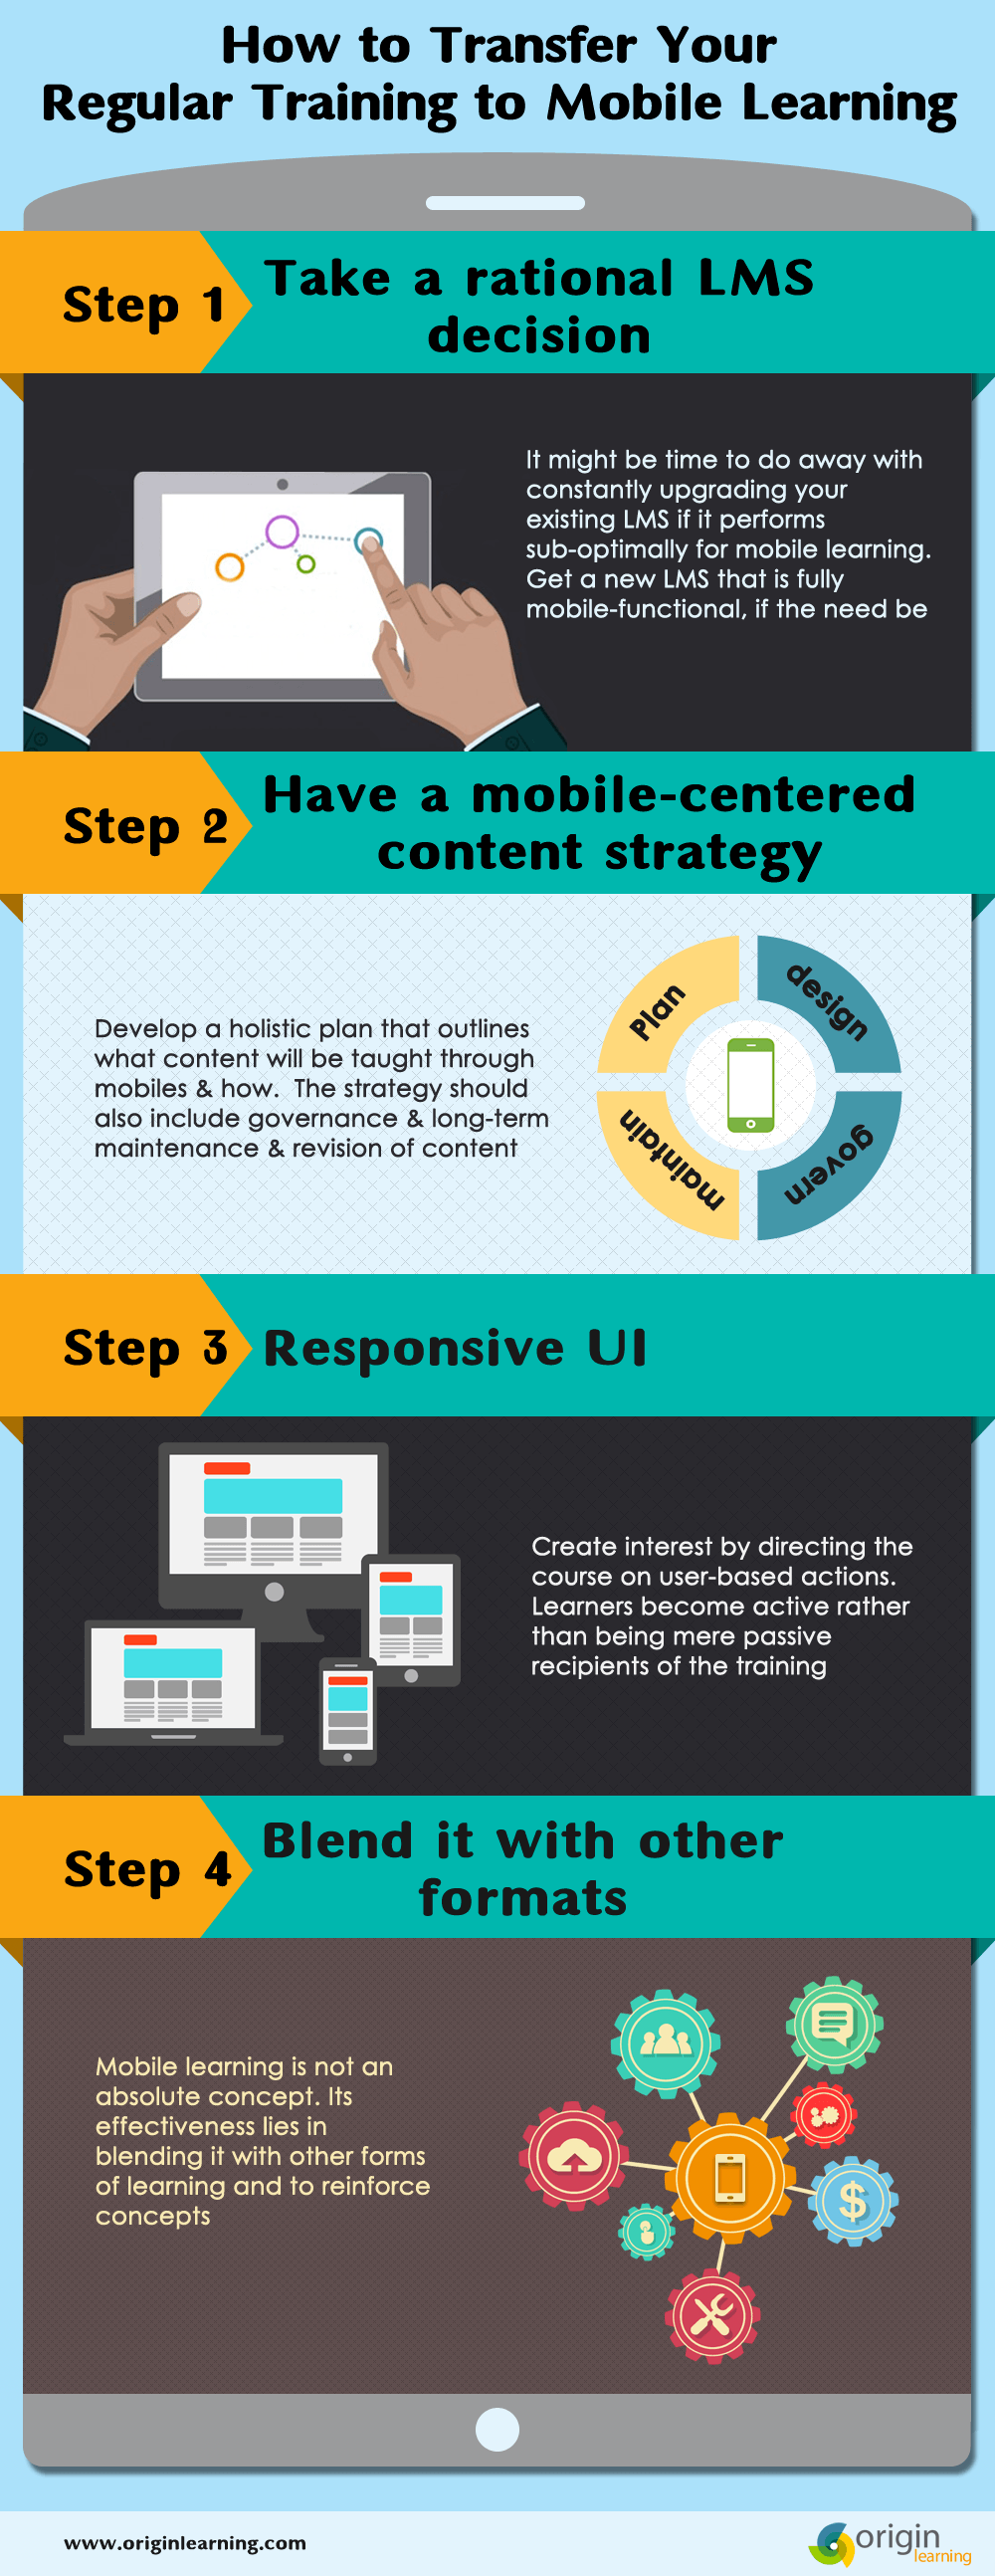 4 Steps to Transfer Your Regular Training to Mobile Learning Infographic